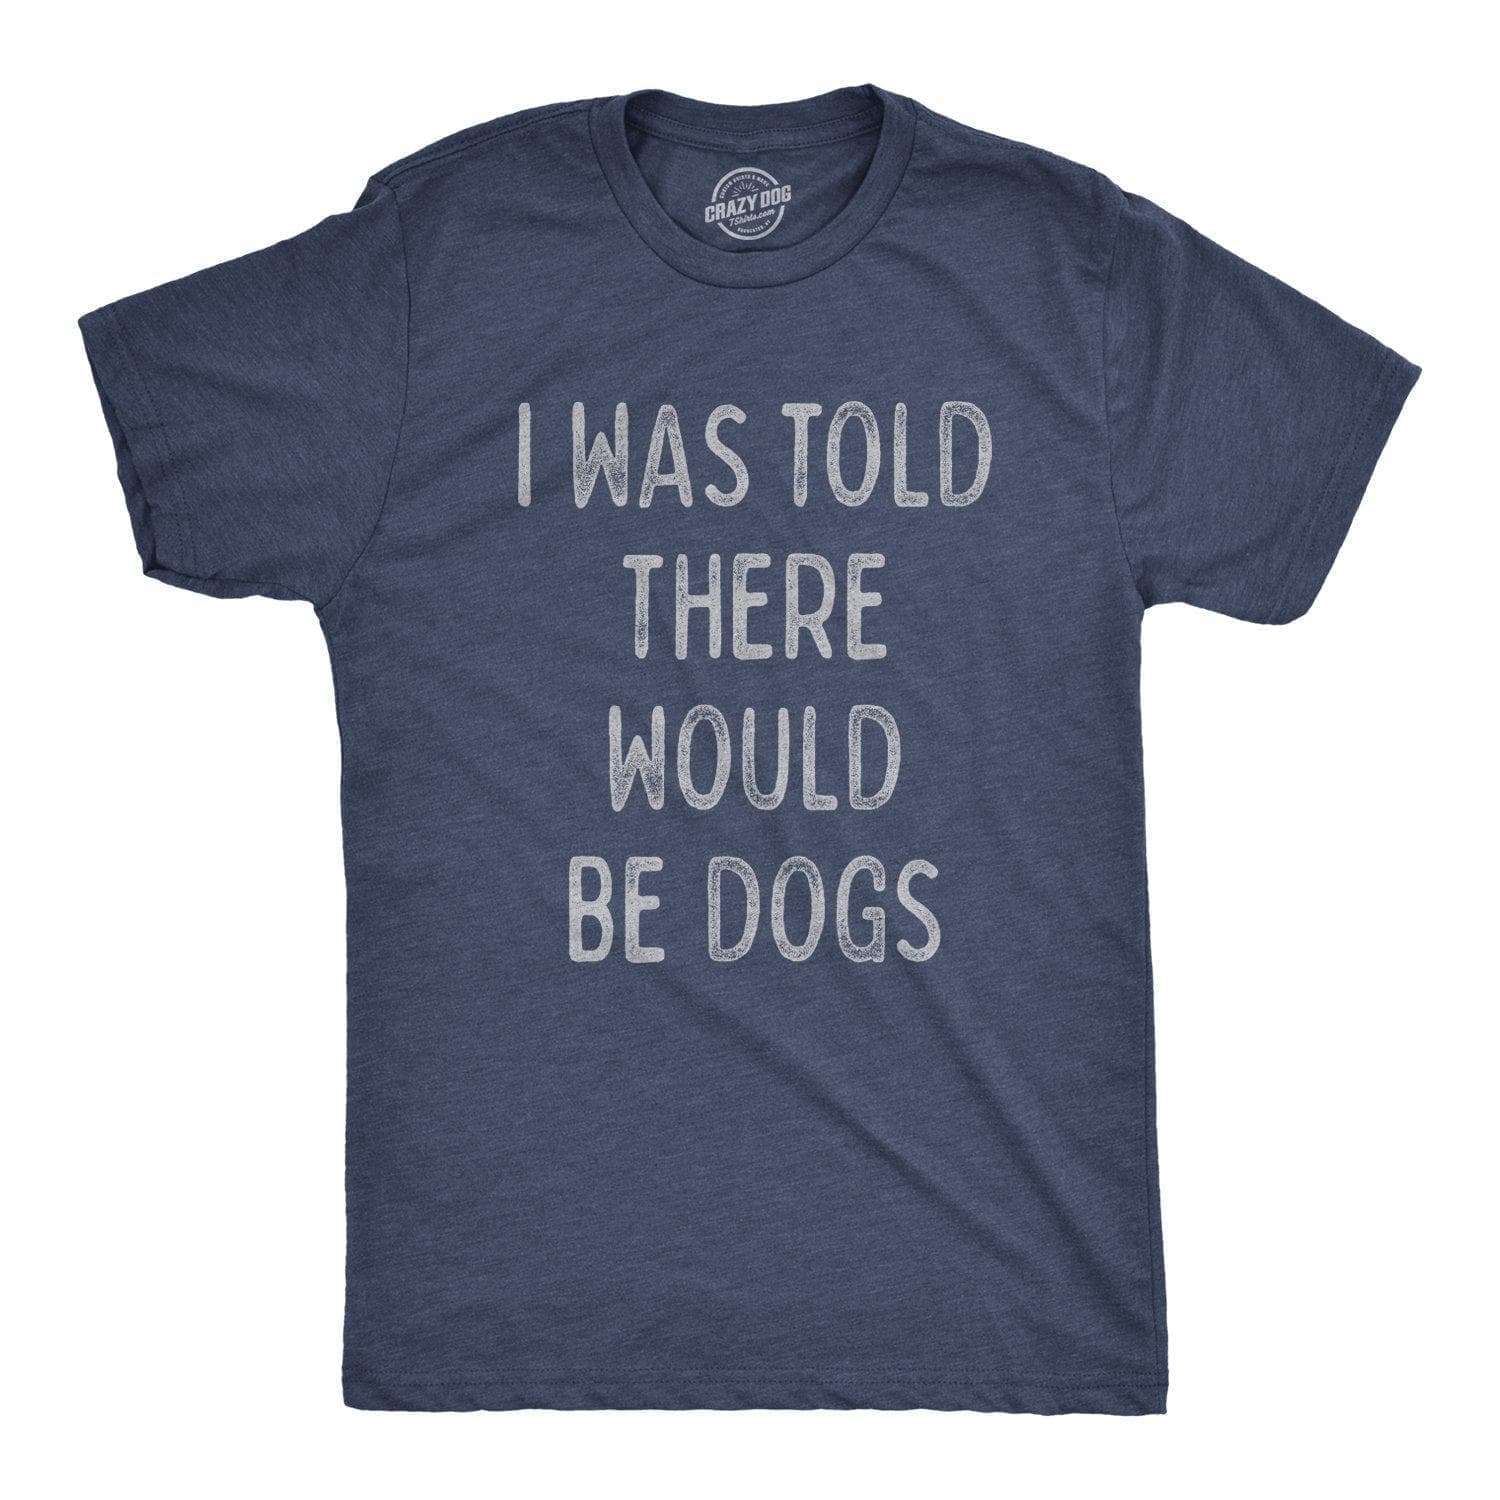 I Was Told There Would Be Dogs Men's Tshirt  -  Crazy Dog T-Shirts